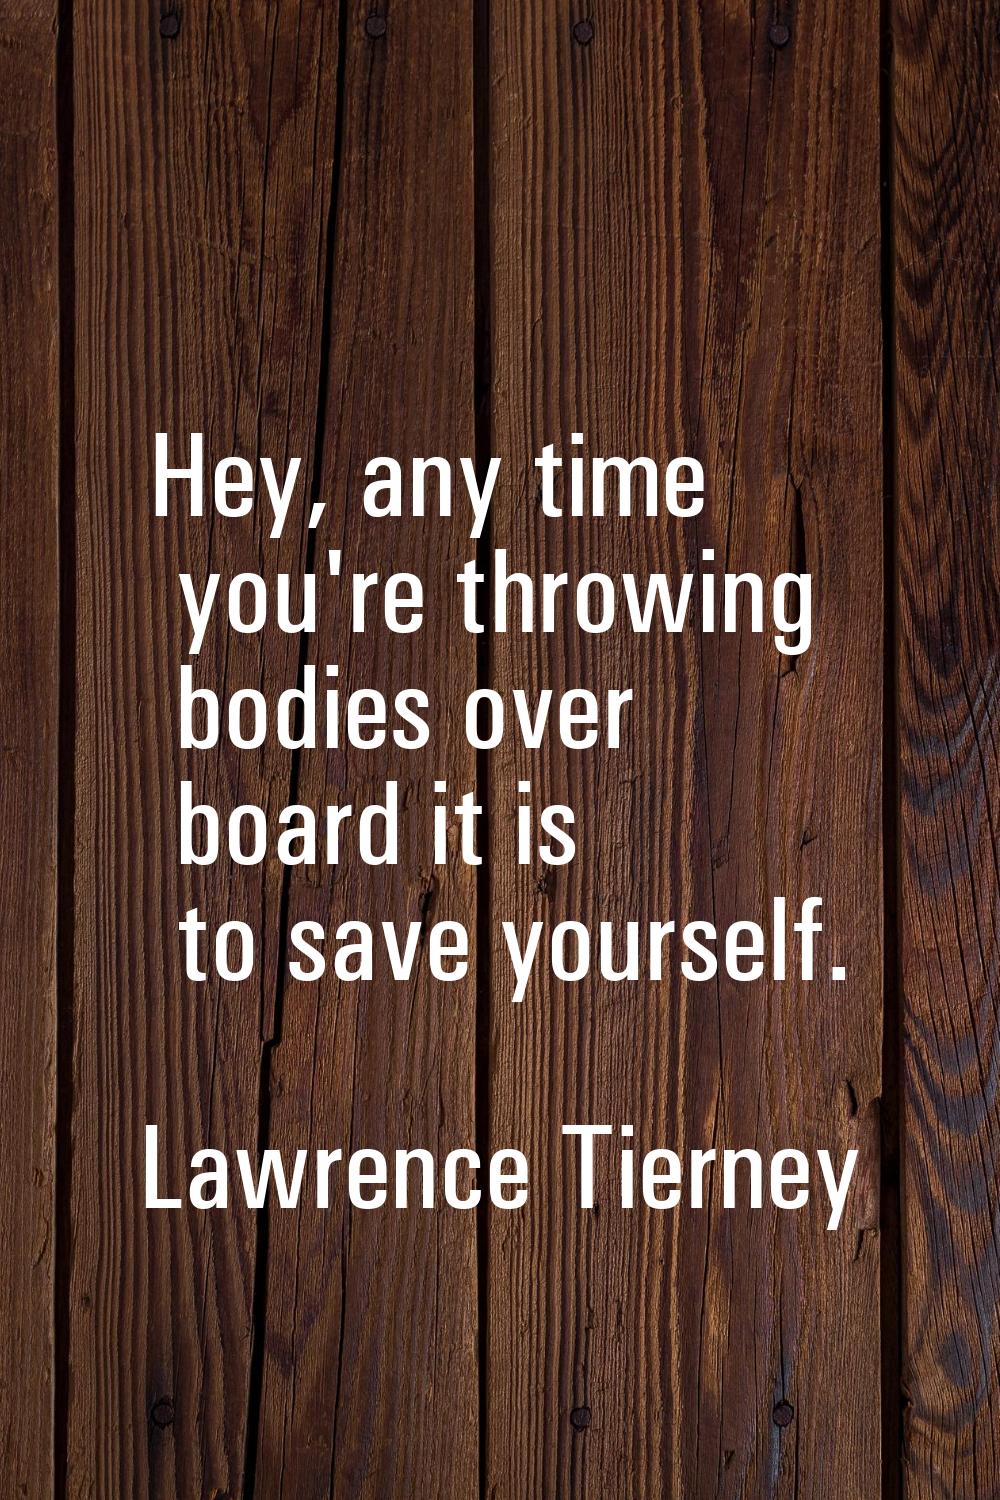 Hey, any time you're throwing bodies over board it is to save yourself.